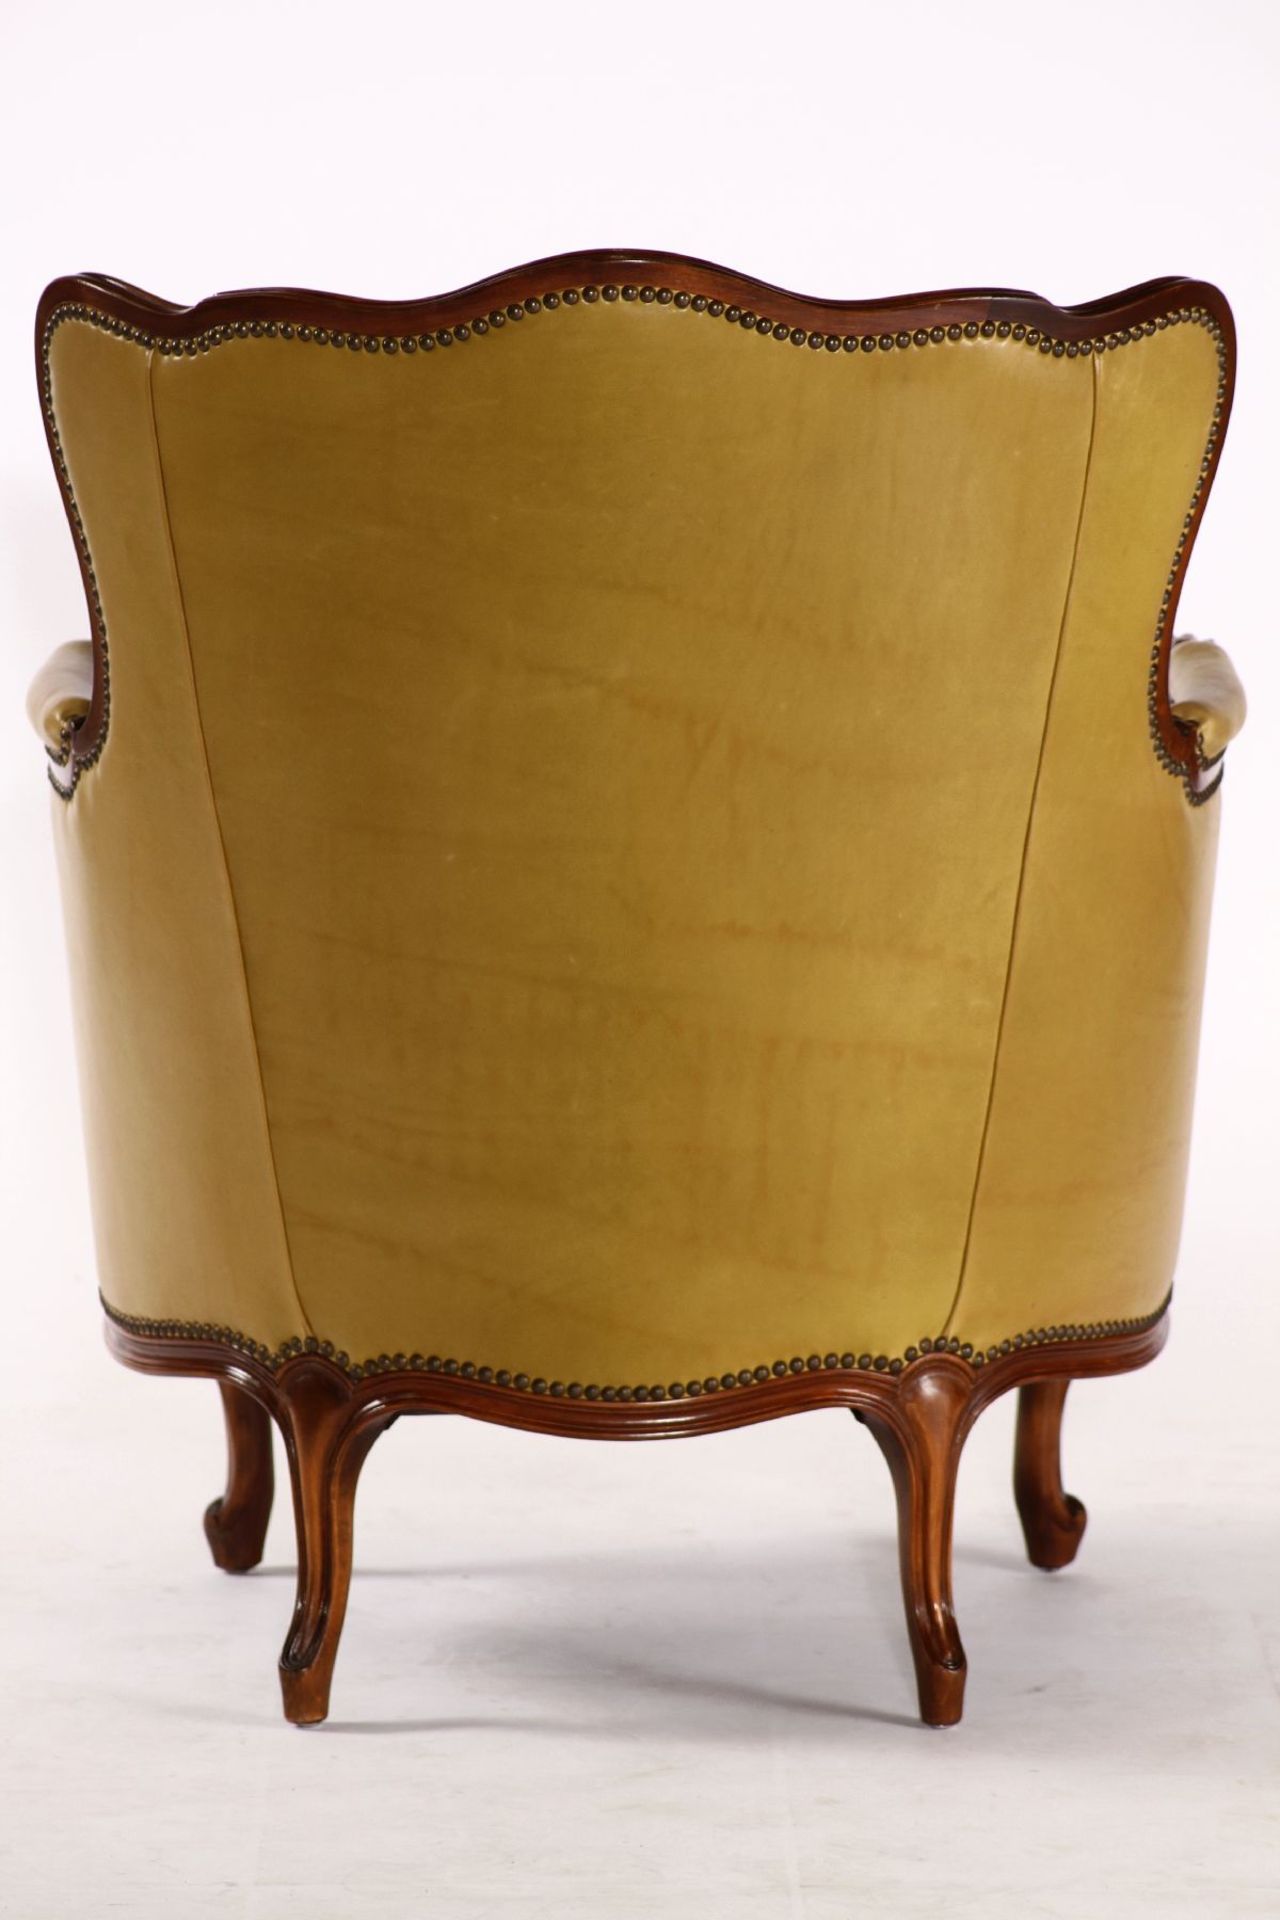 Armchair, after Engl. Prototype from 1870/80, solid walnut frame, yellow-green or olive leather - Image 4 of 4